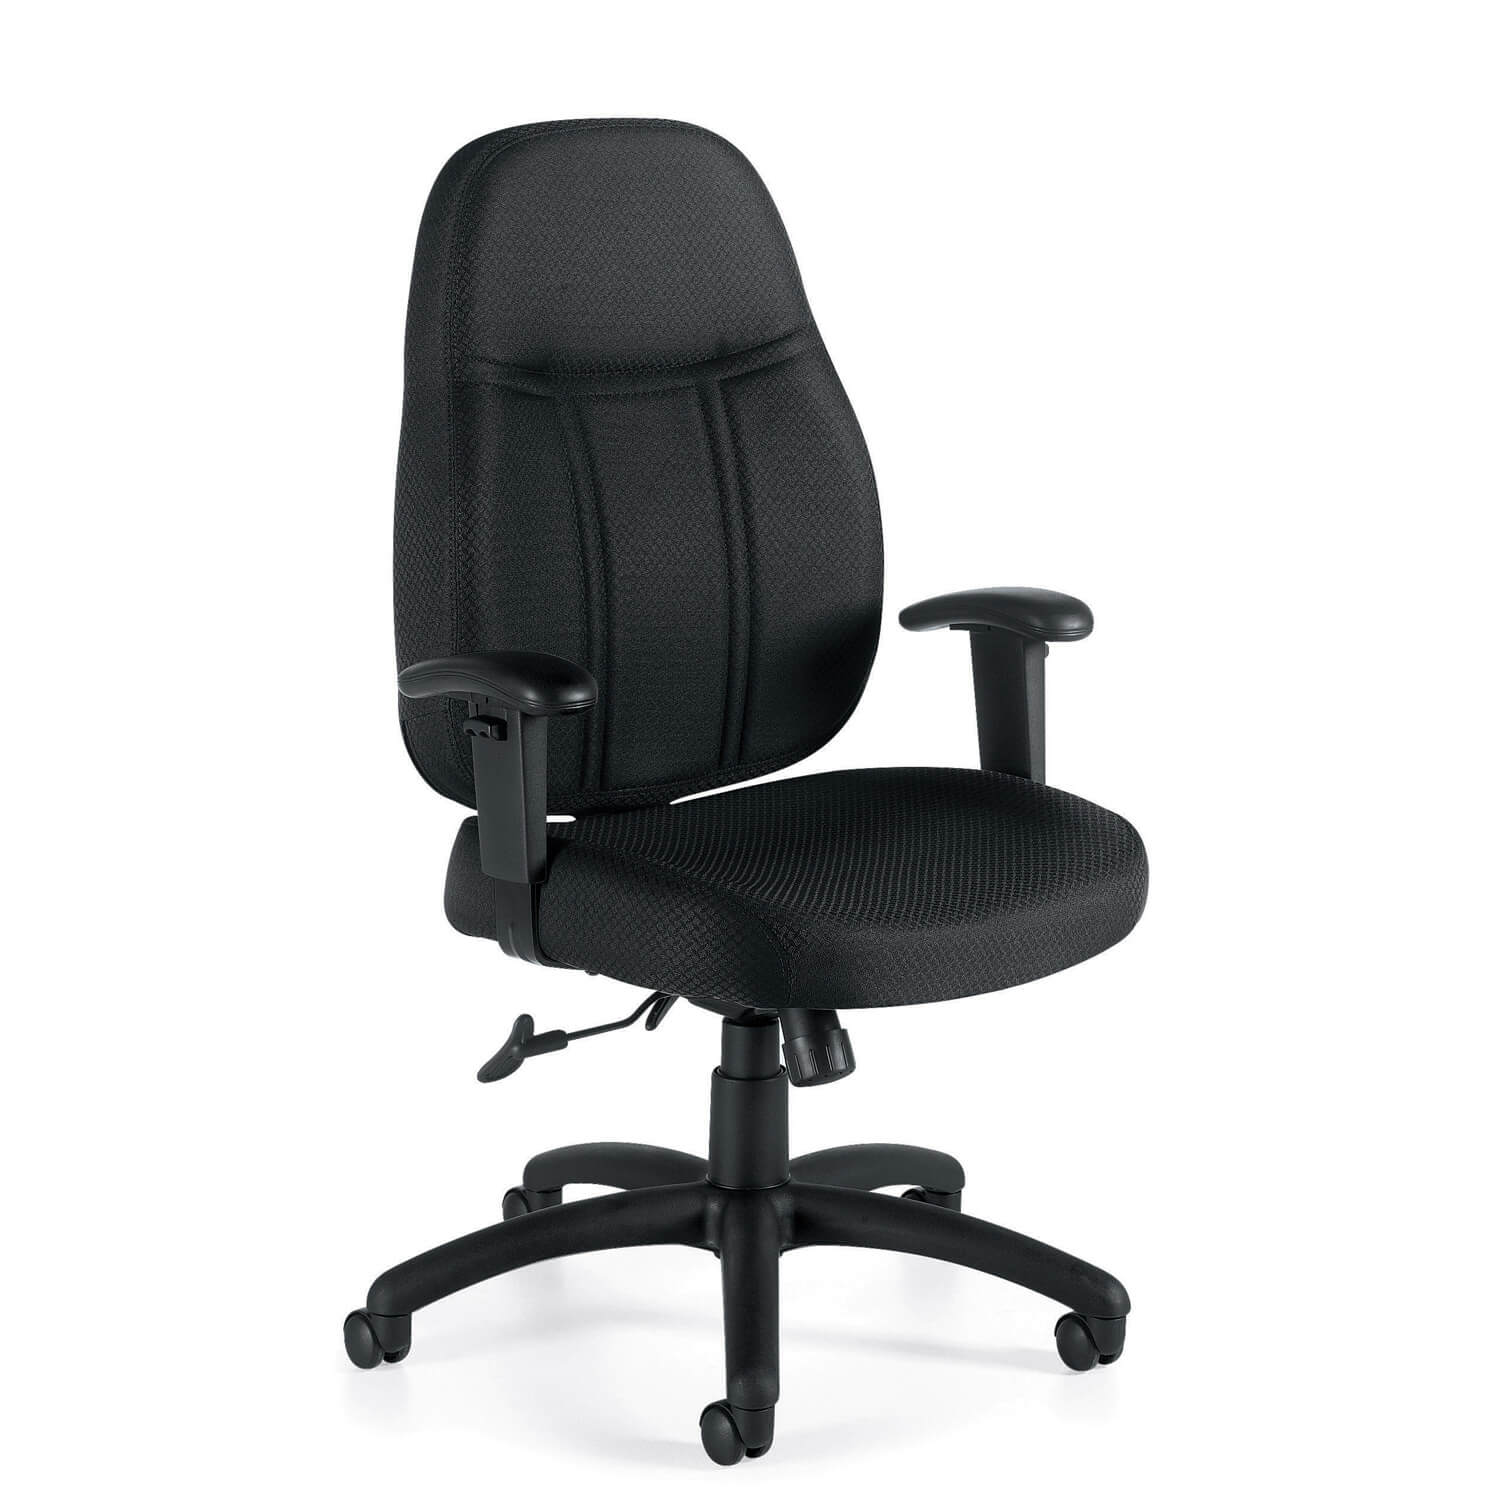 Office Desk Chairs - Jasonni Adjustable Office Chairs